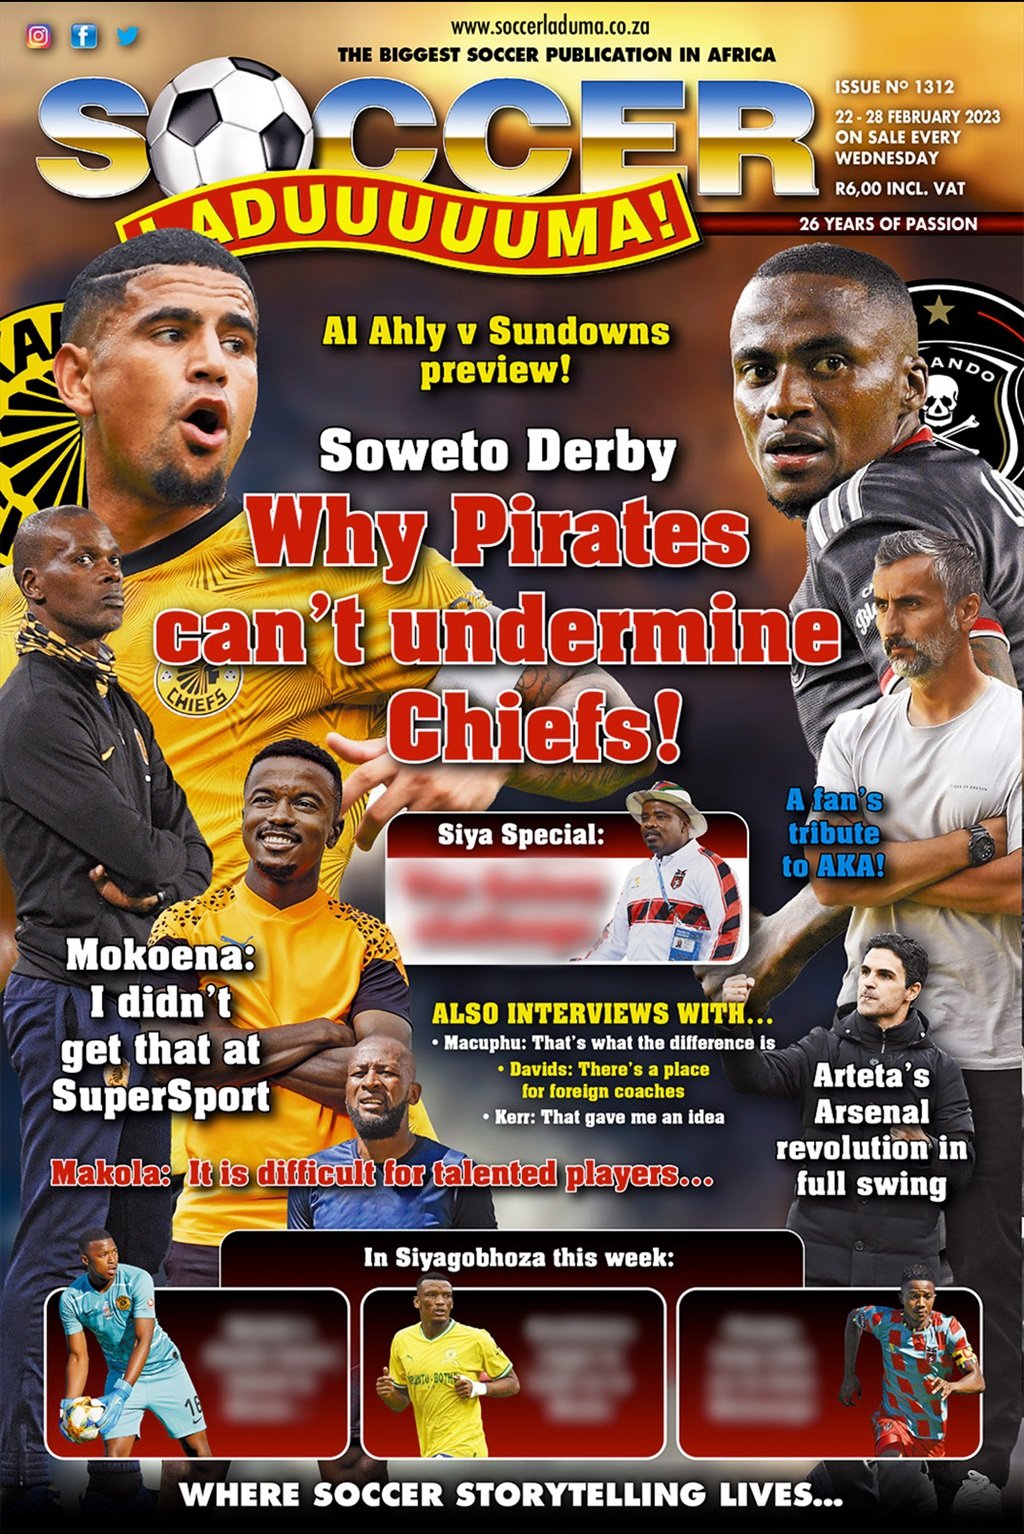 In this week's edition of Soccer Laduma